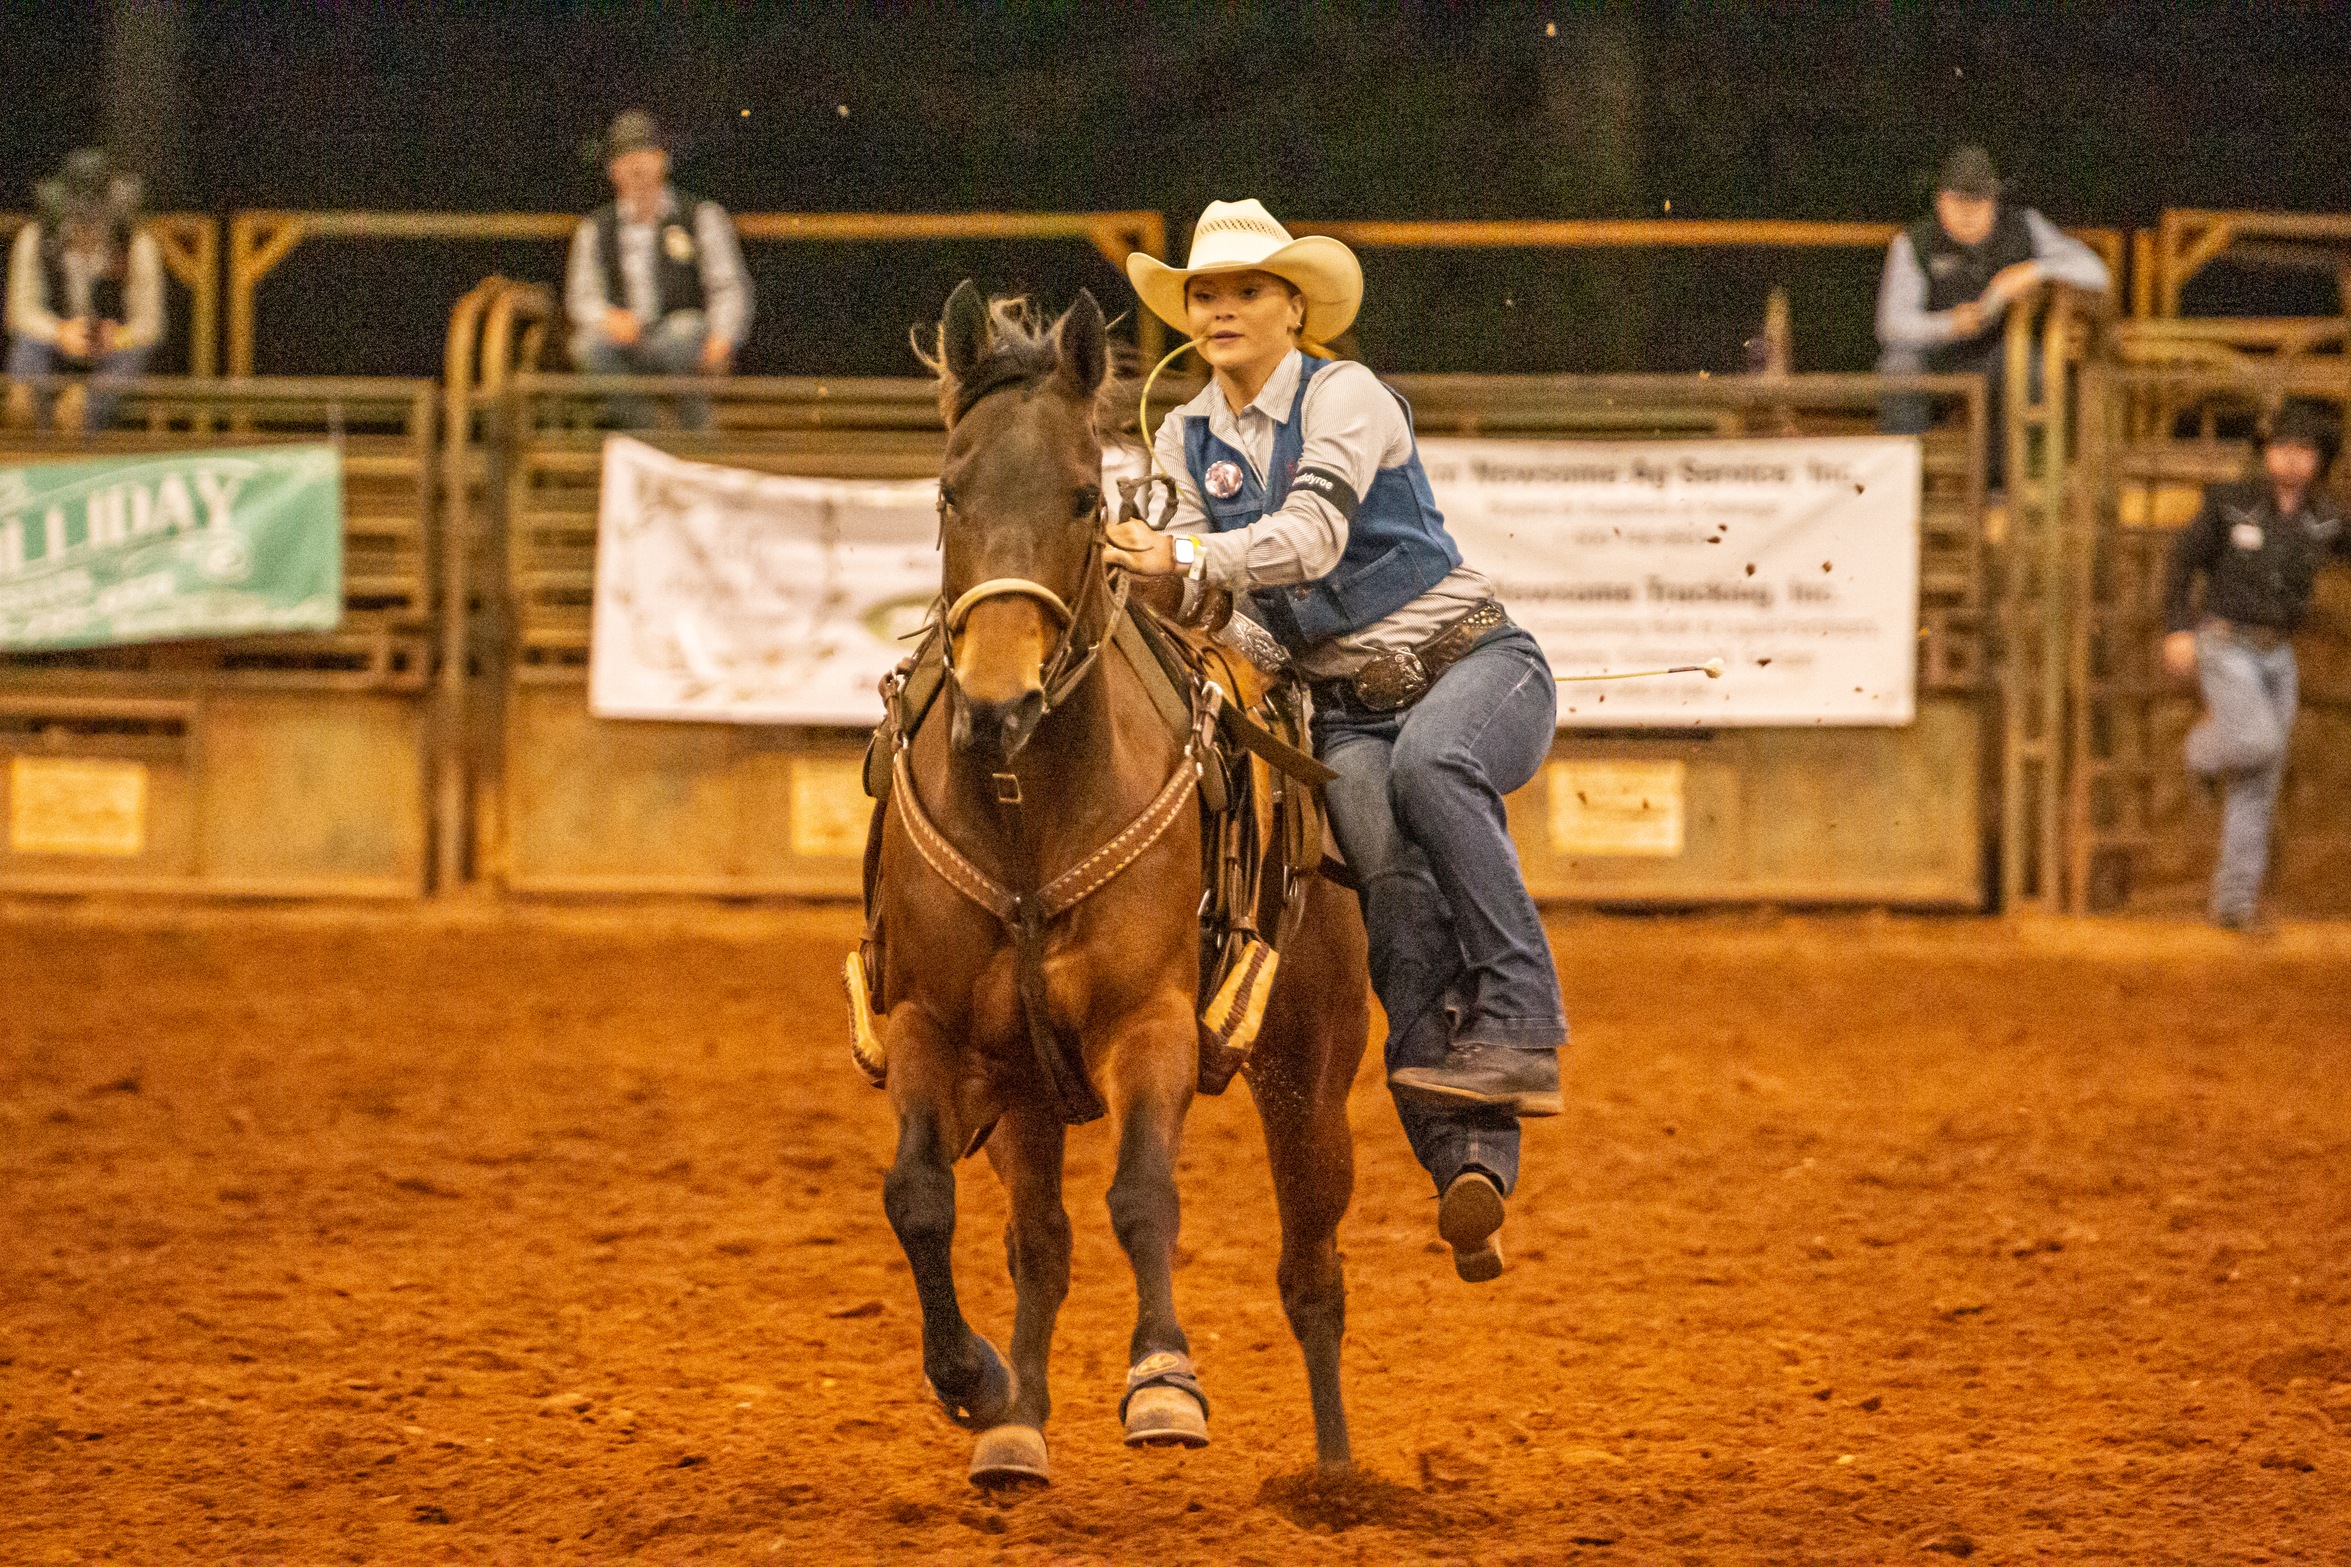 Pearl River Rodeo team impresses fans in home rodeo